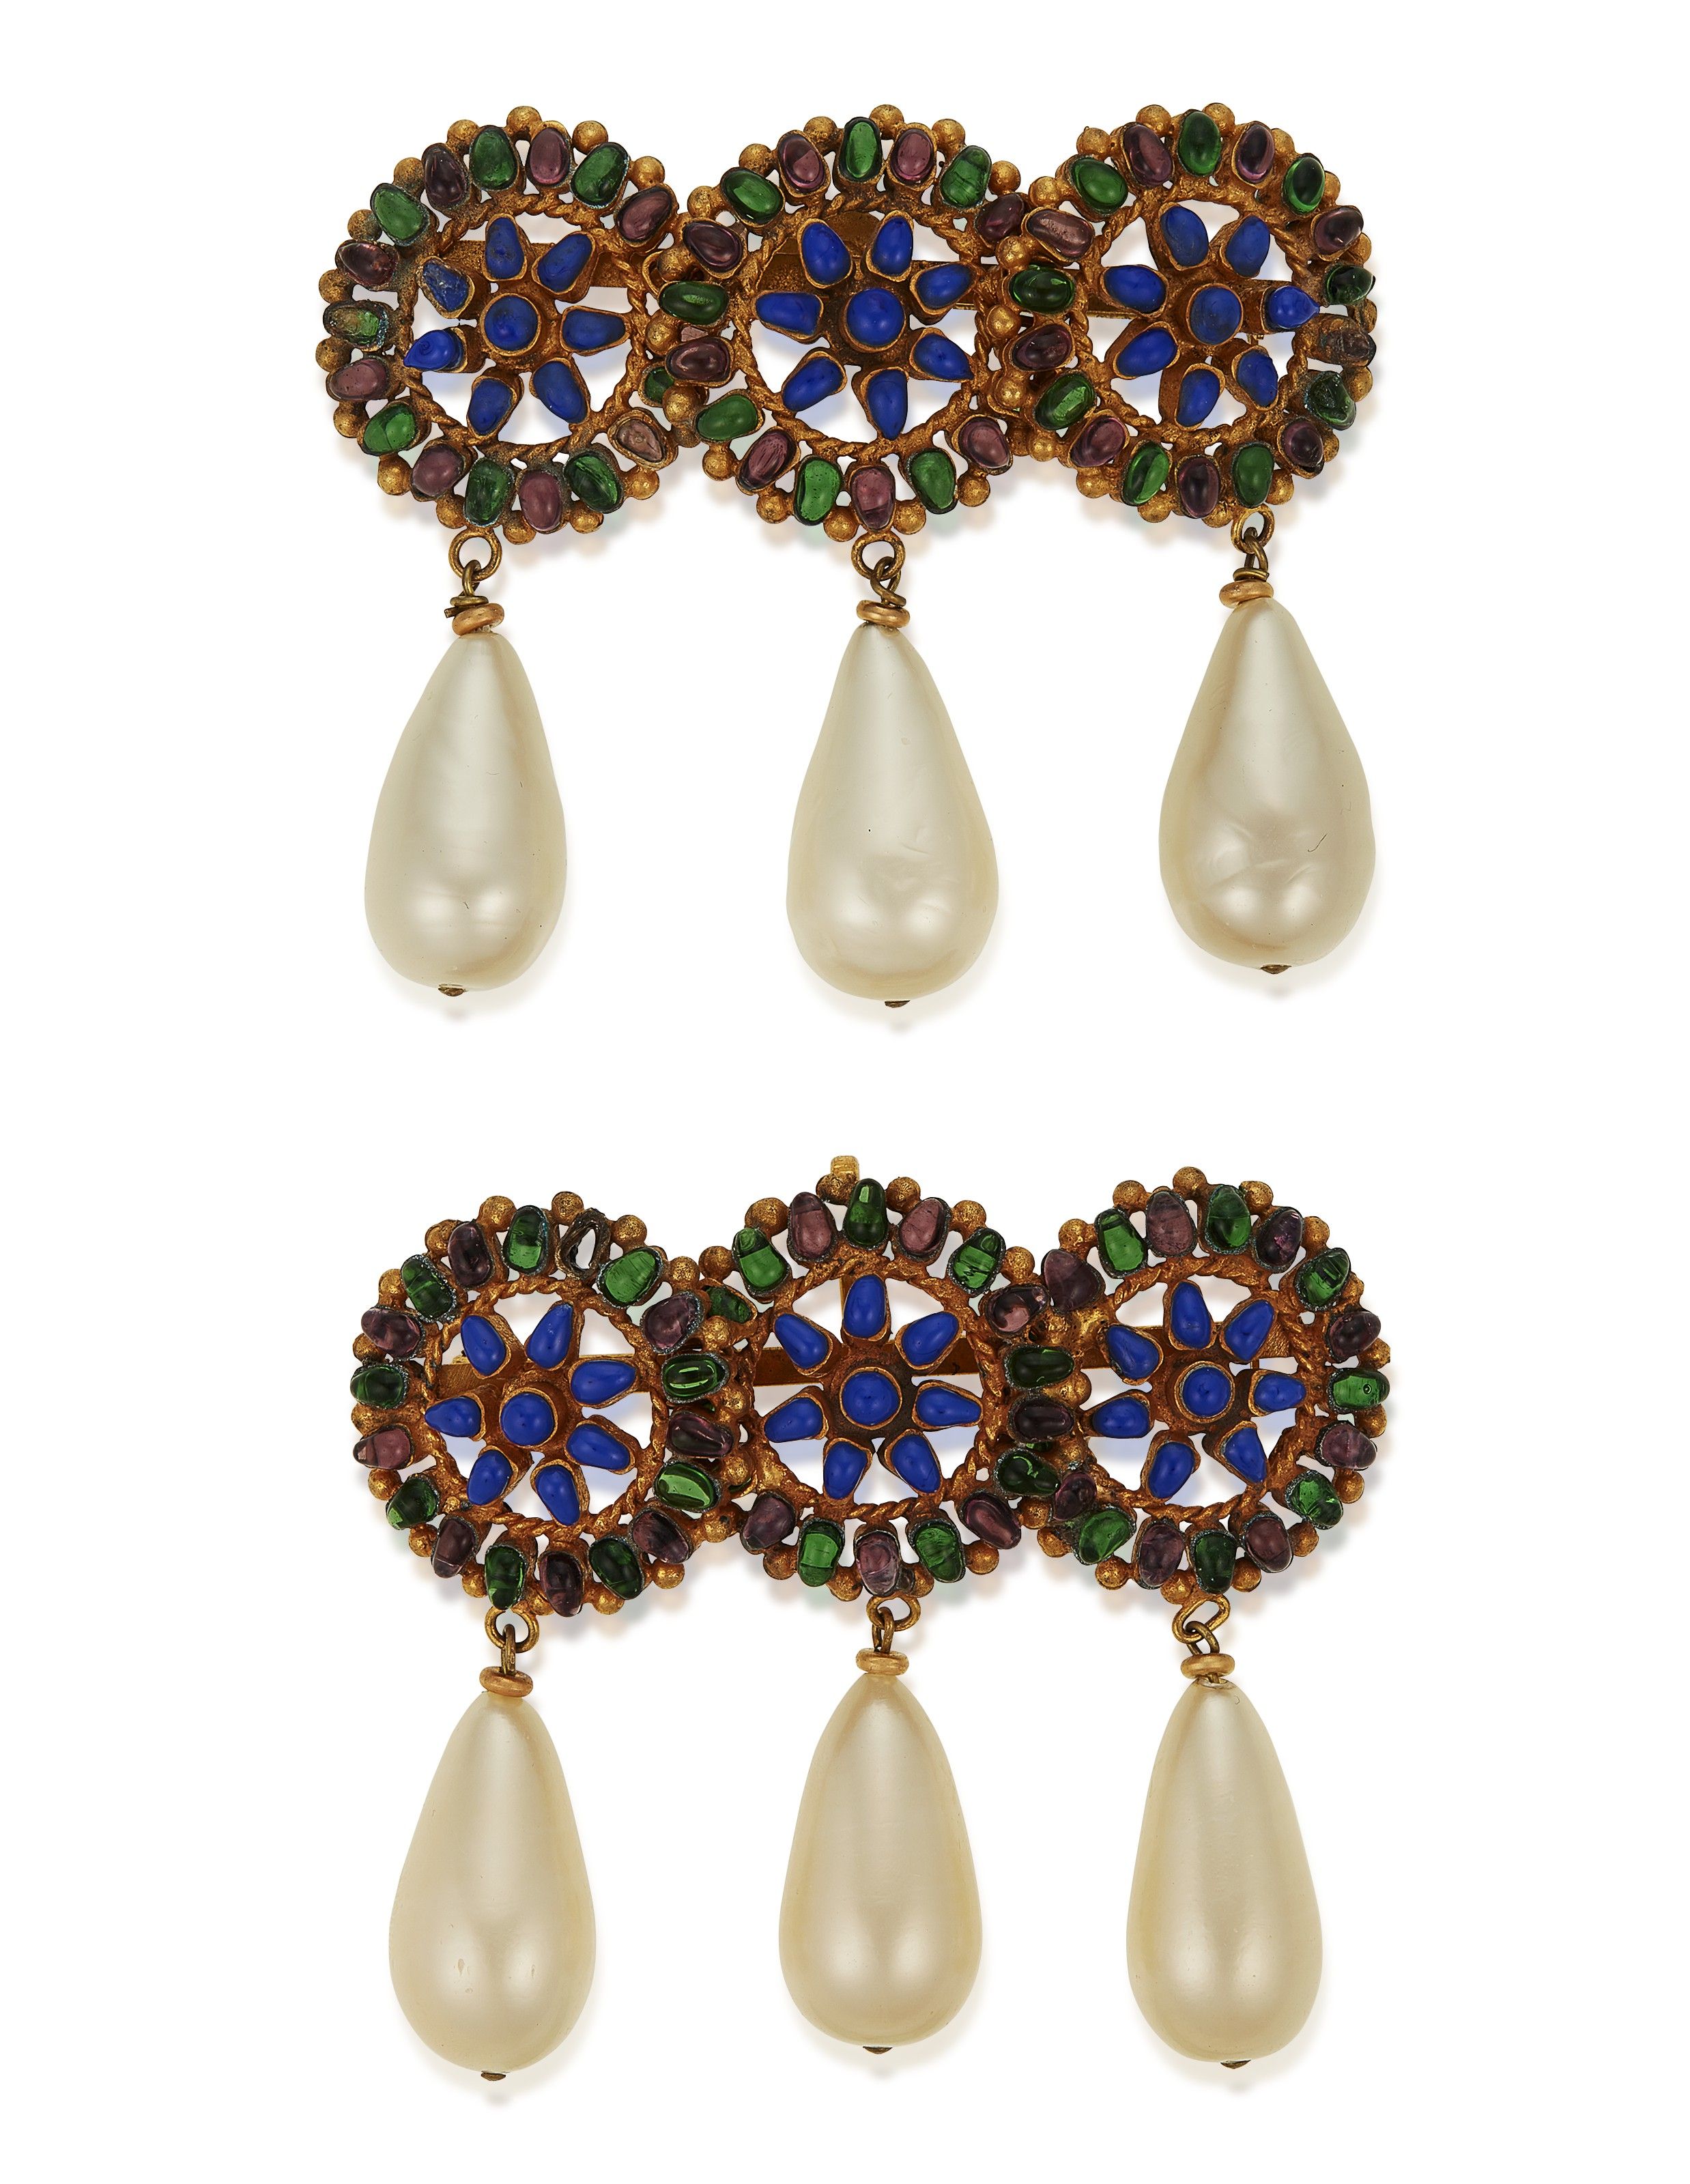 Auction Preview: The Jewelry Collection of Mrs. Susan Gutfreund